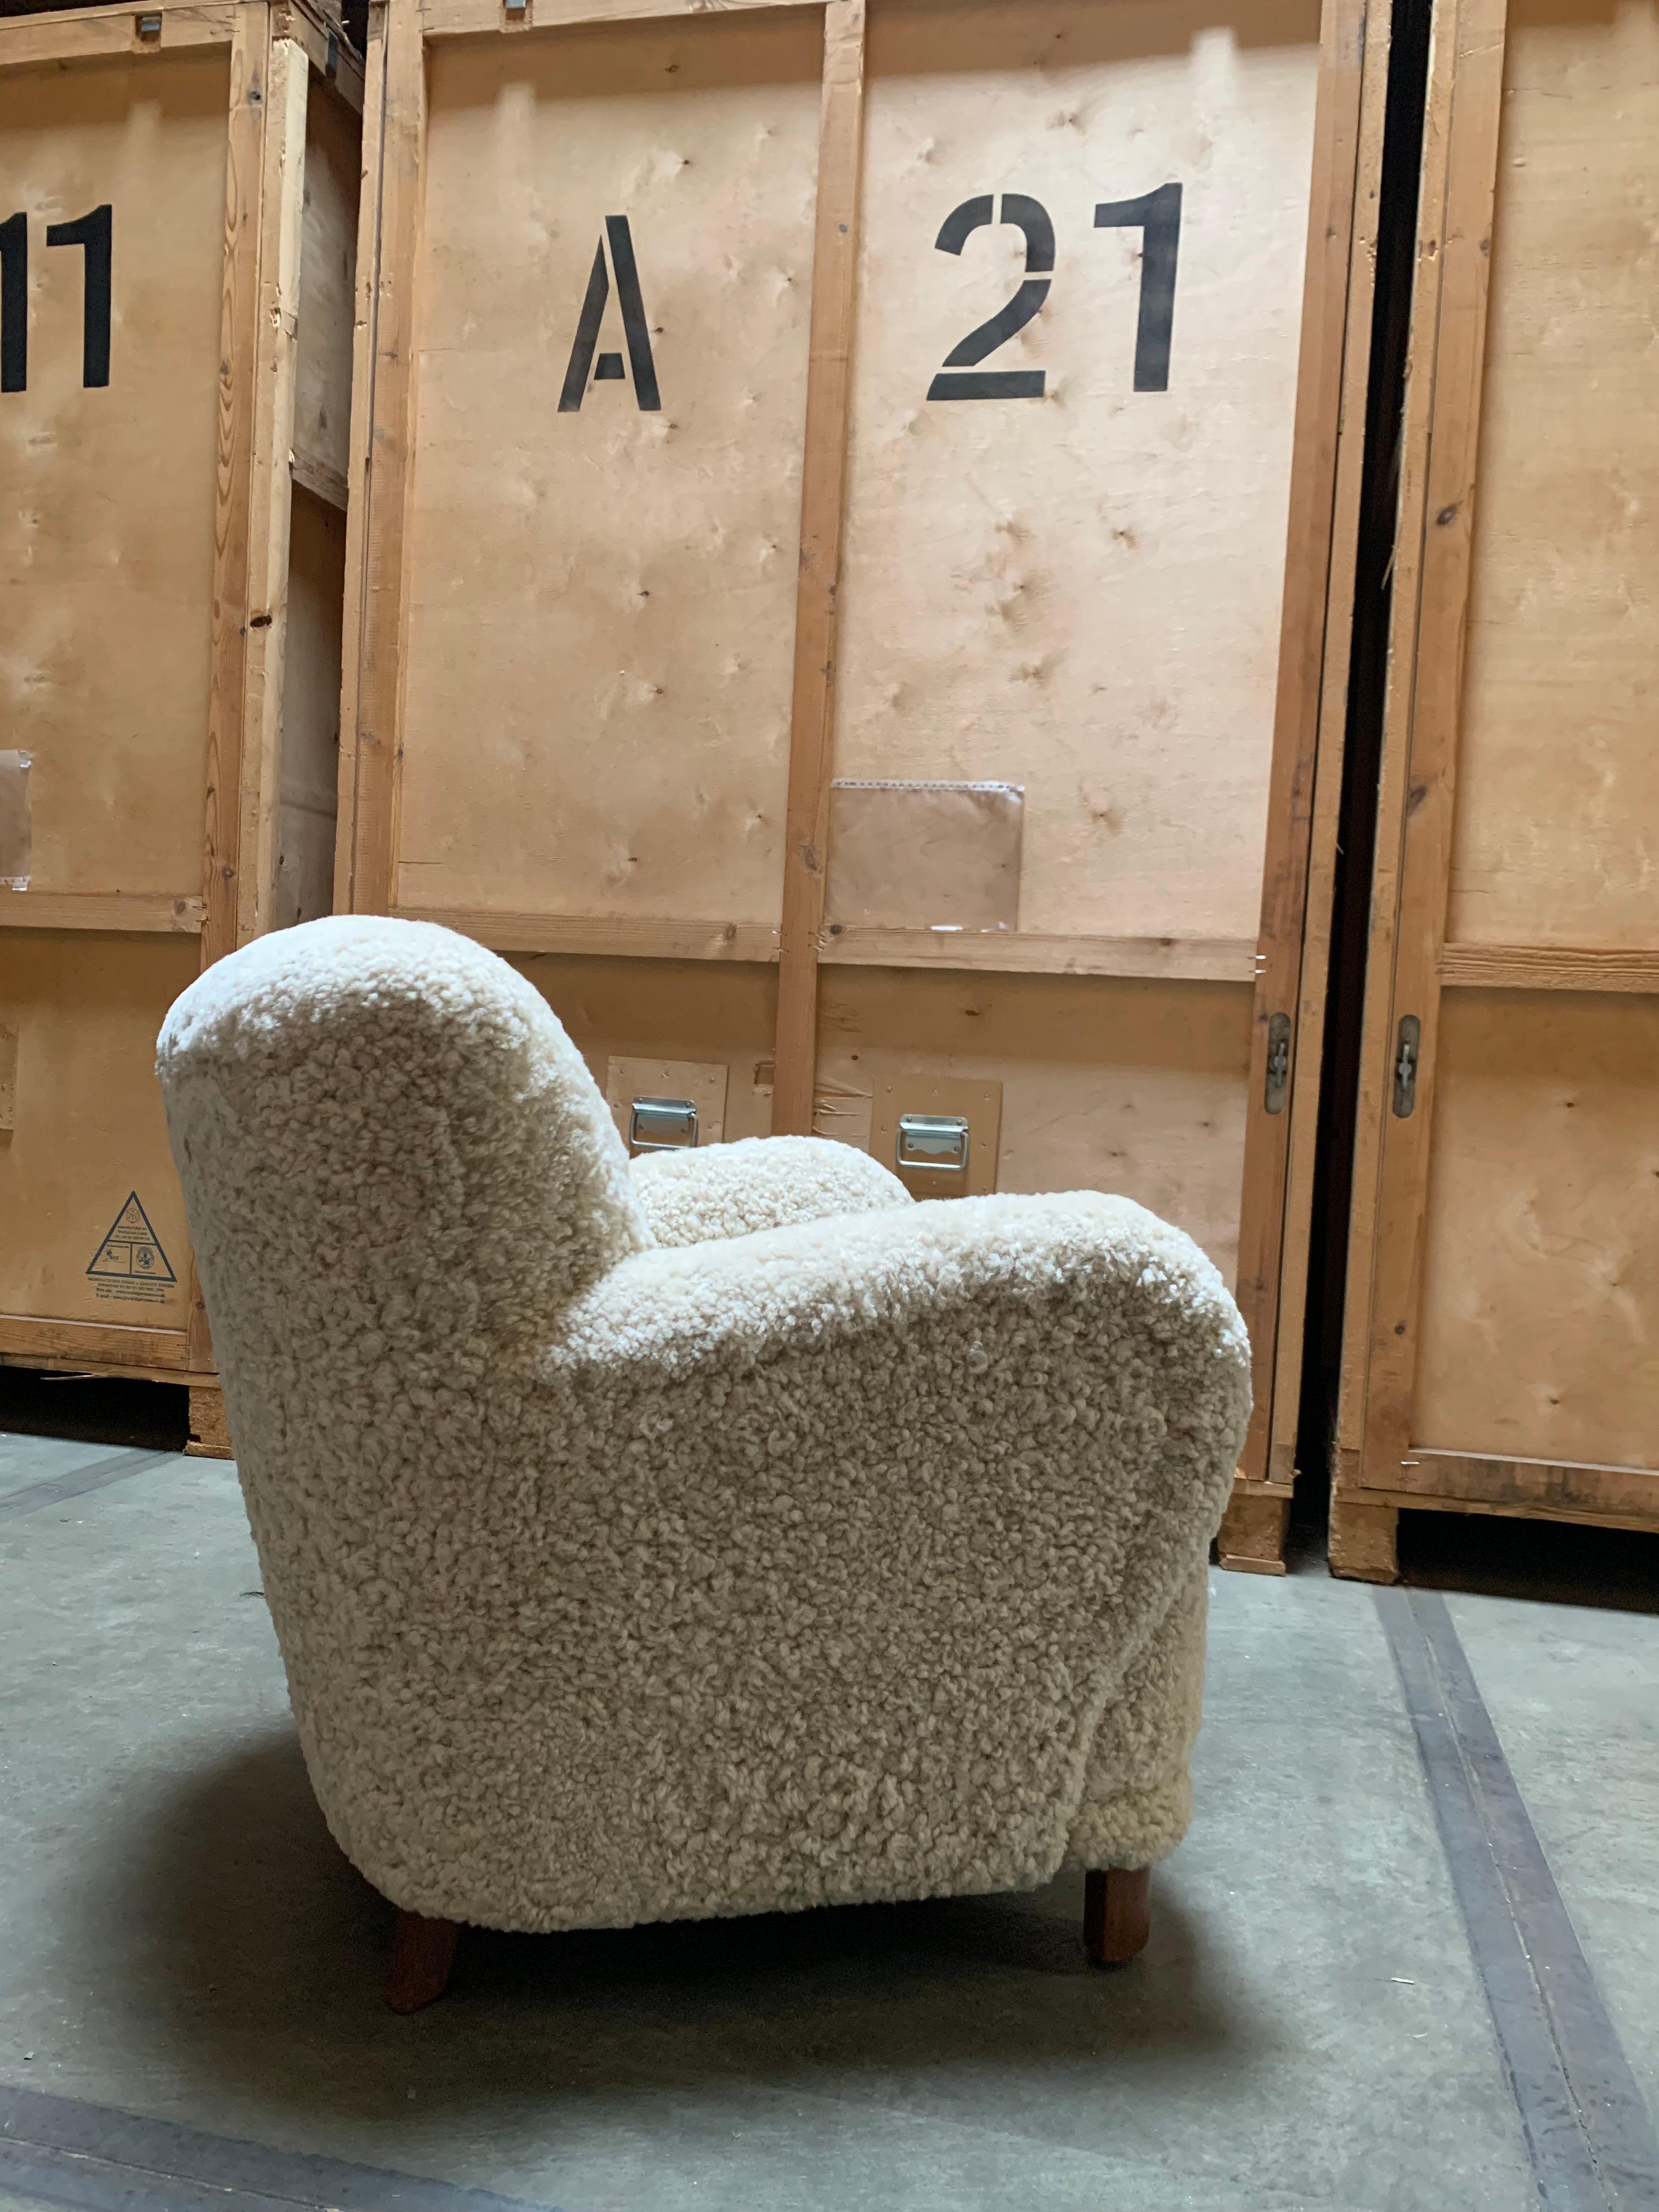 Danish modern furniture maker 1940s sheepskin armchair with beautiful lines from every angle. A daring chair design with wide armrests that invite you to come and sit. The wide back and the very large armrests give the chair character and a